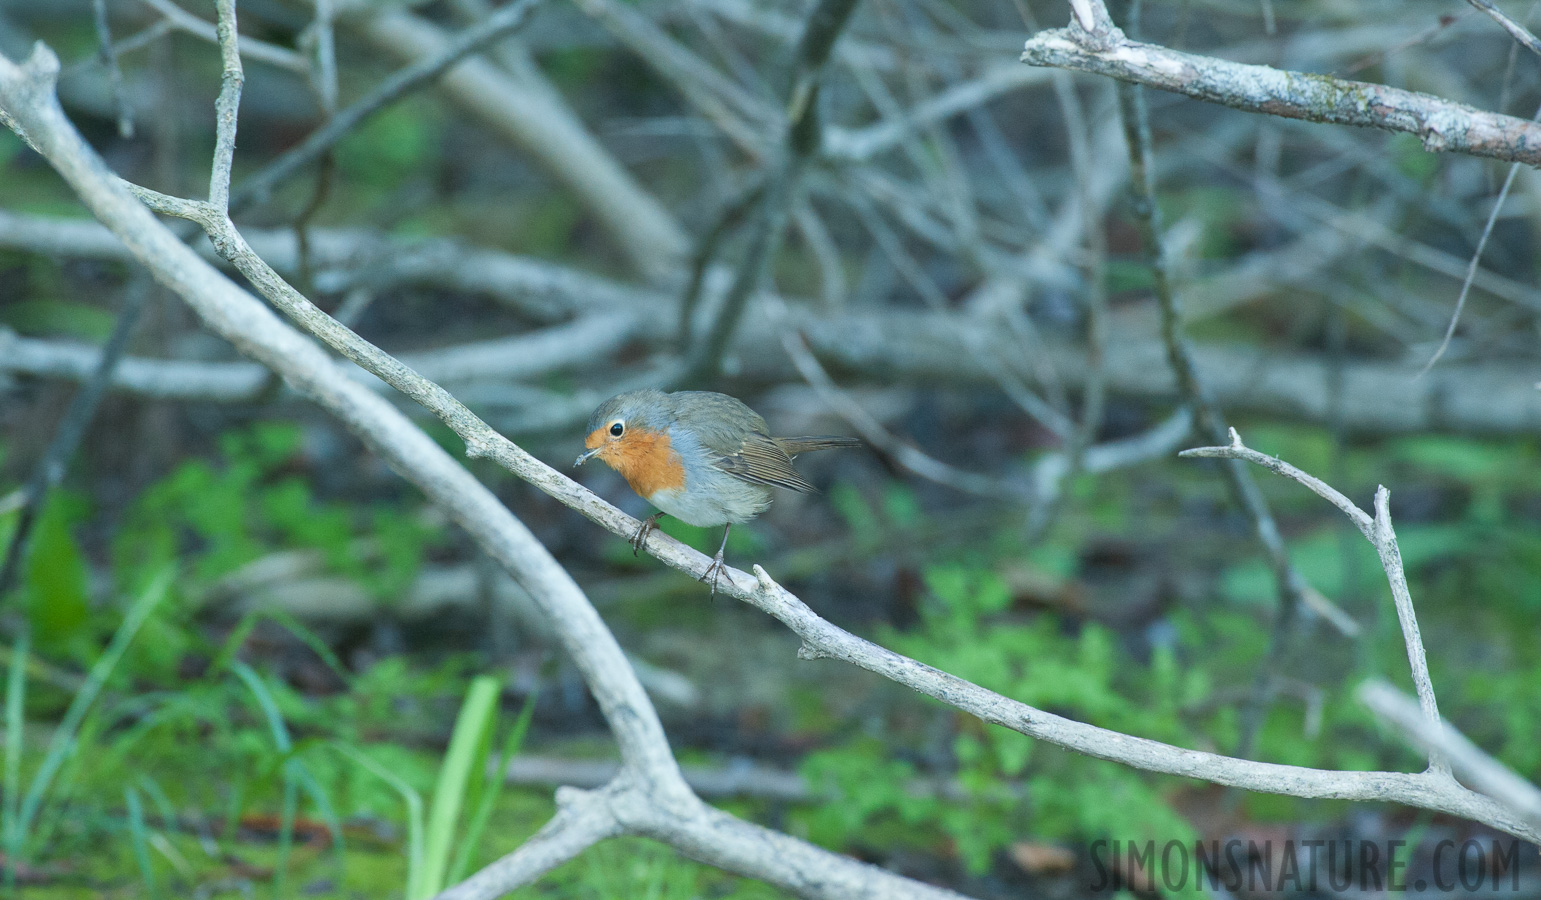 Erithacus rubecula [550 mm, 1/80 sec at f / 8.0, ISO 2500]